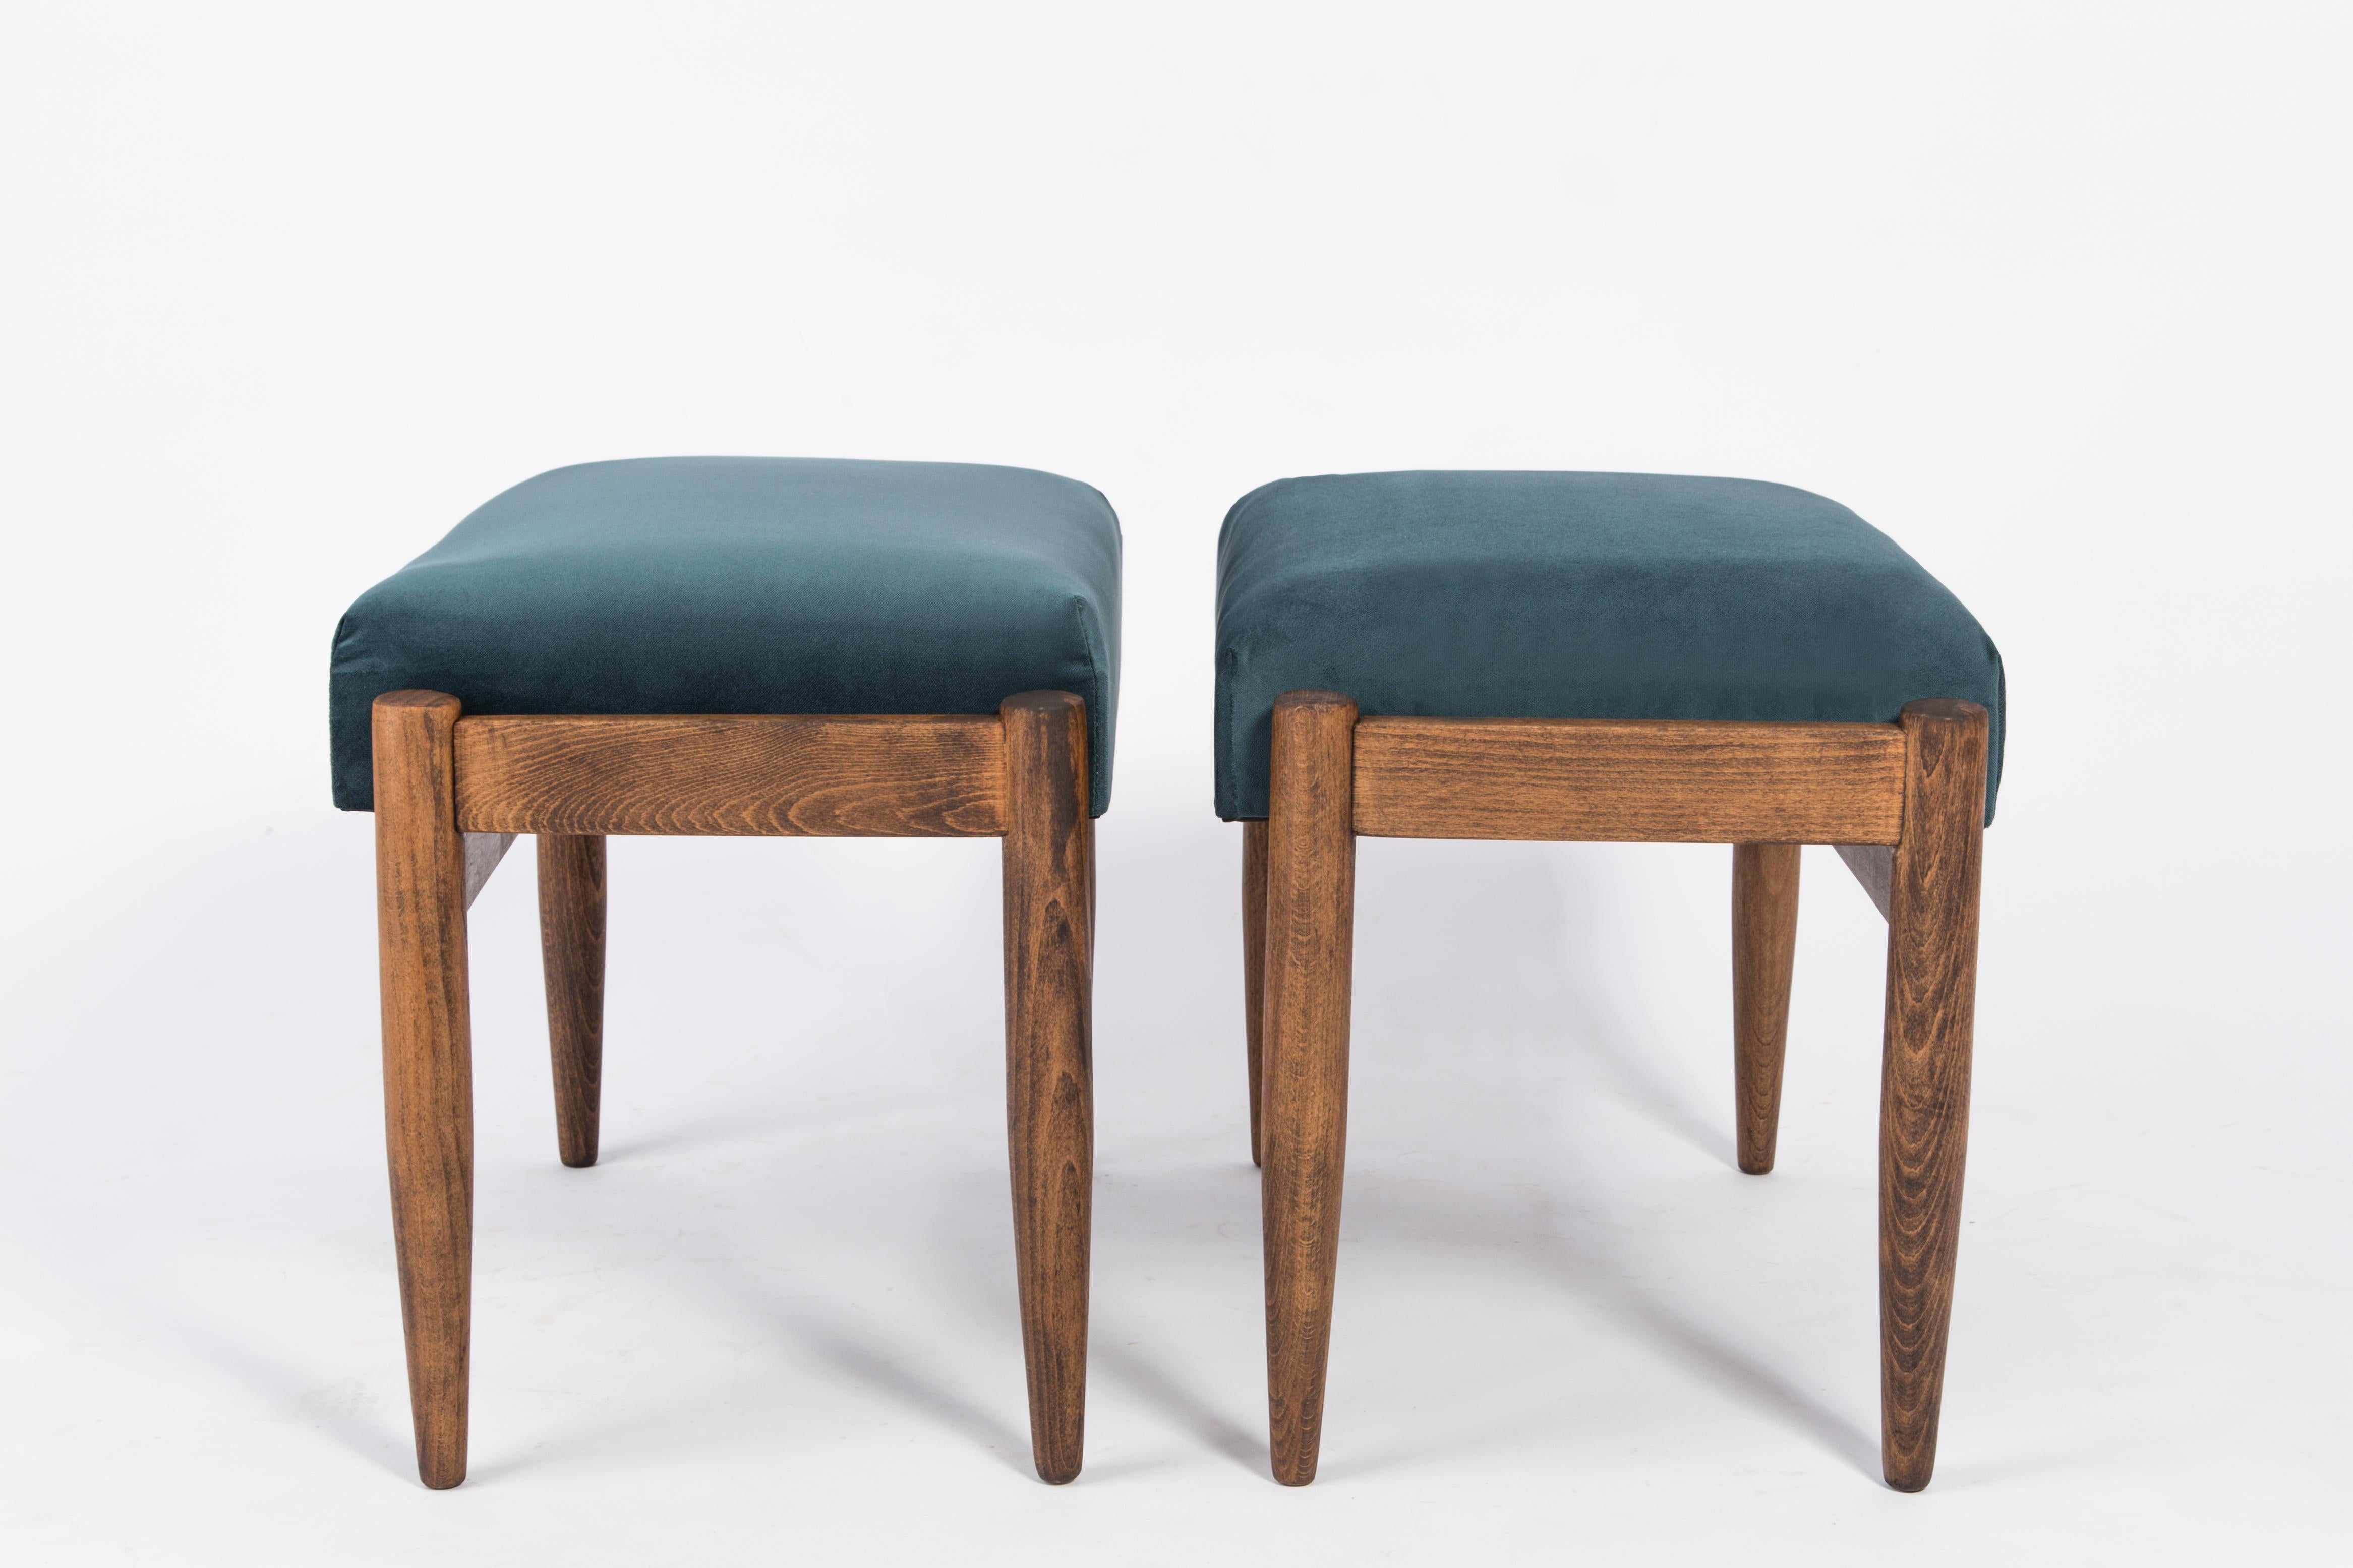 Hand-Crafted Set of Two Petrol Blue Vintage Stools, Edmund Homa, 1960s For Sale